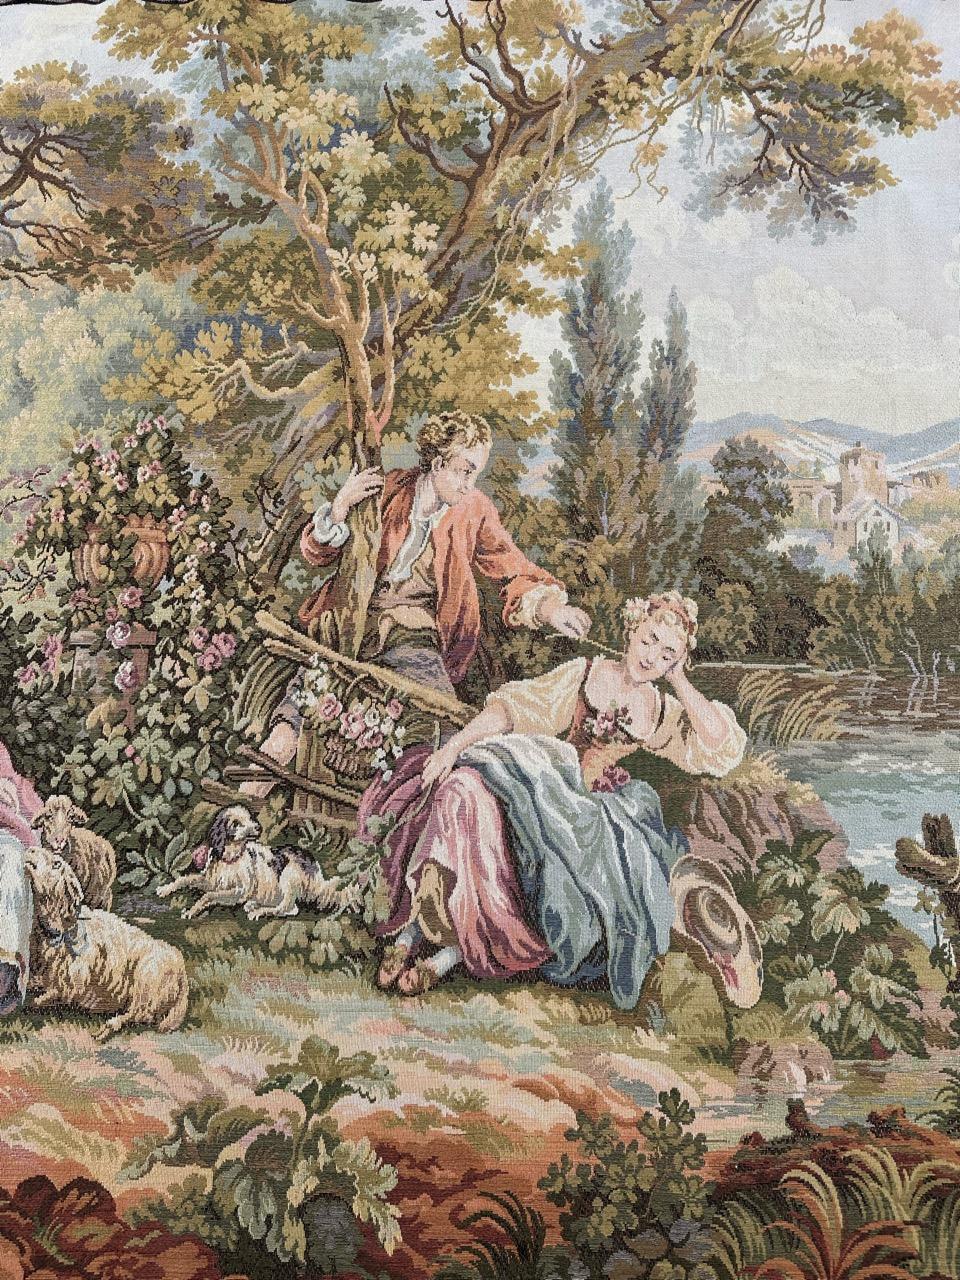 « Les Amours Pastorales » based on a painting by François Boucher.

The amiable genre of the Pastoral is well suited to the refined and cheerful settings of the 18th century. The painter Boucher (1703-1770) is the brilliant interpreter. The elegance